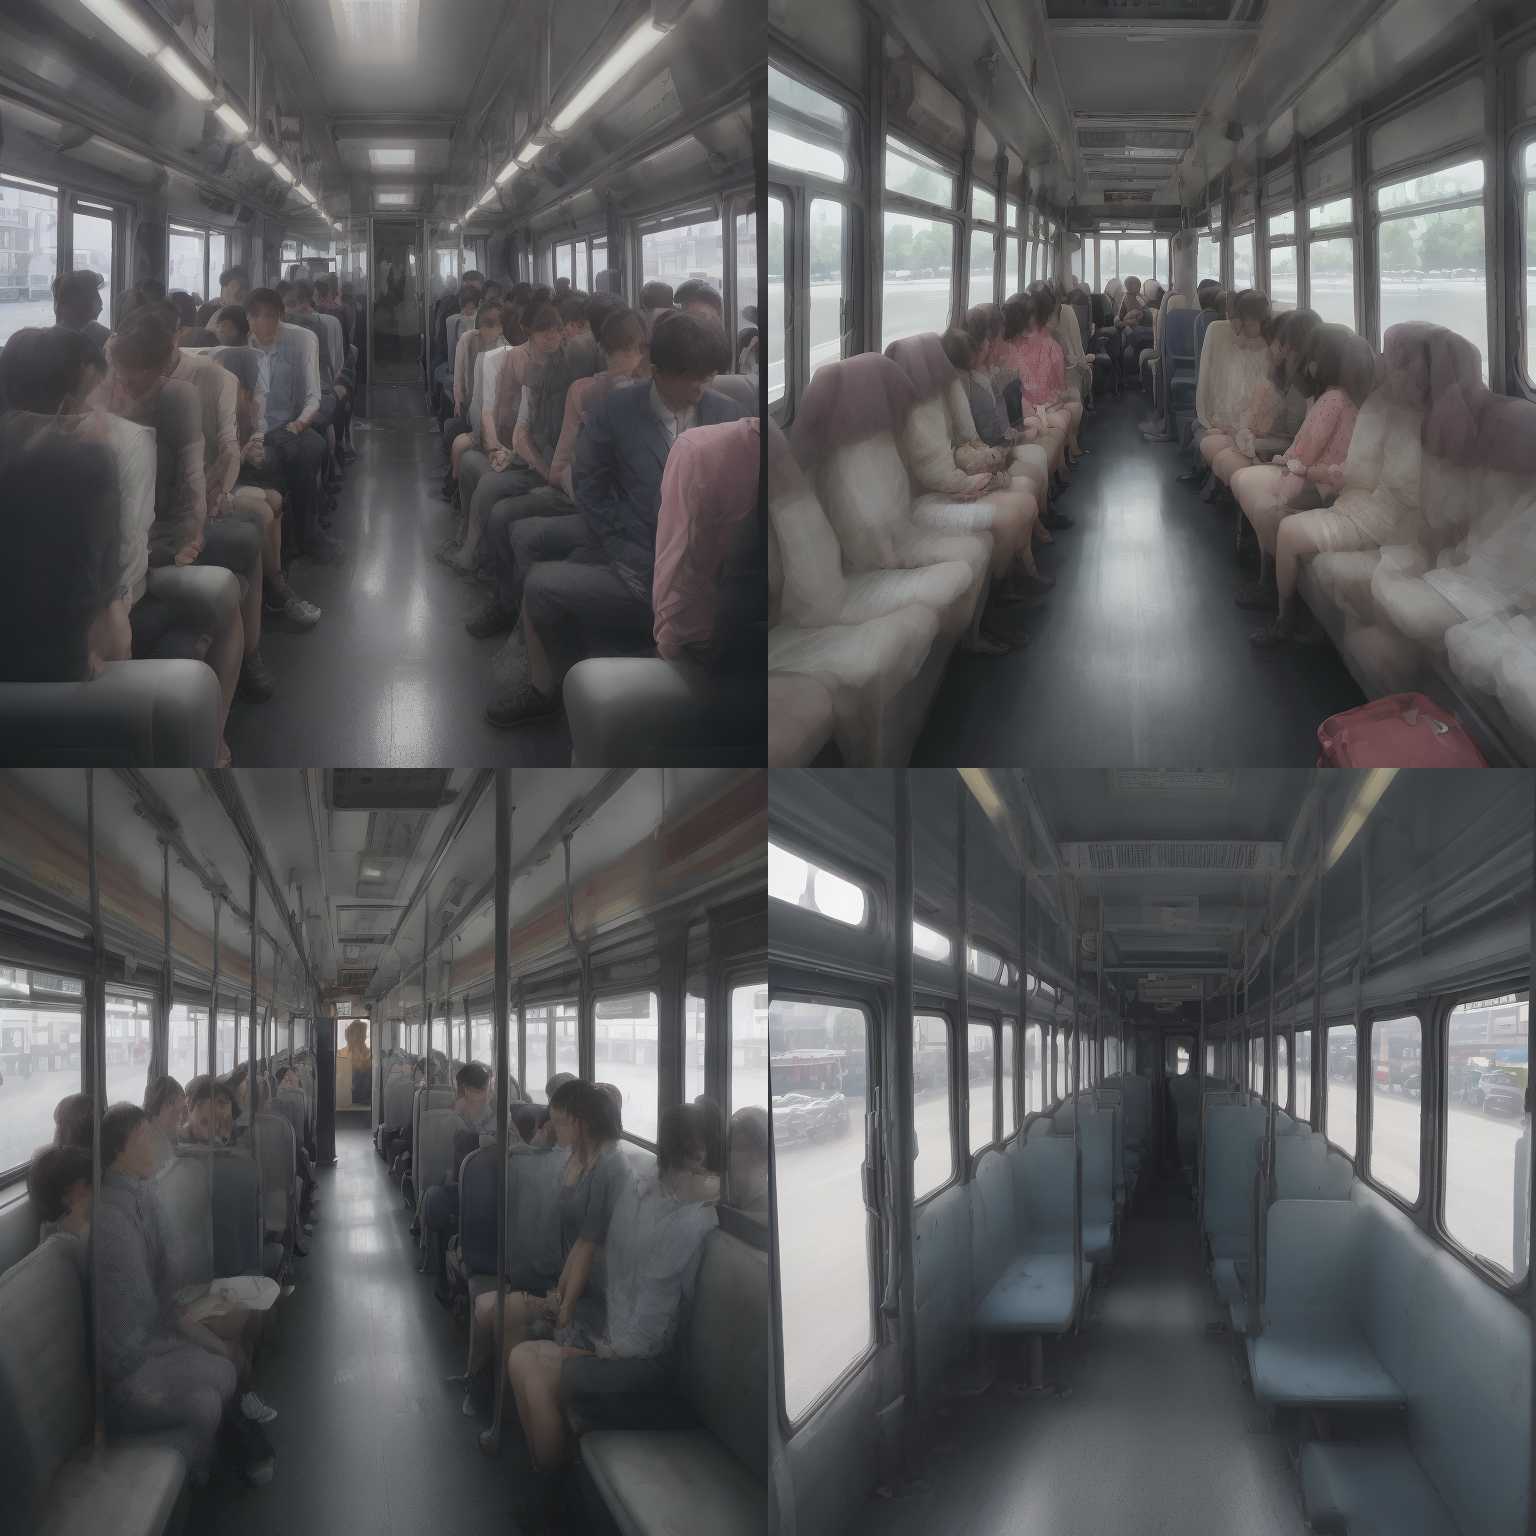 The inside of a bus during peak hours